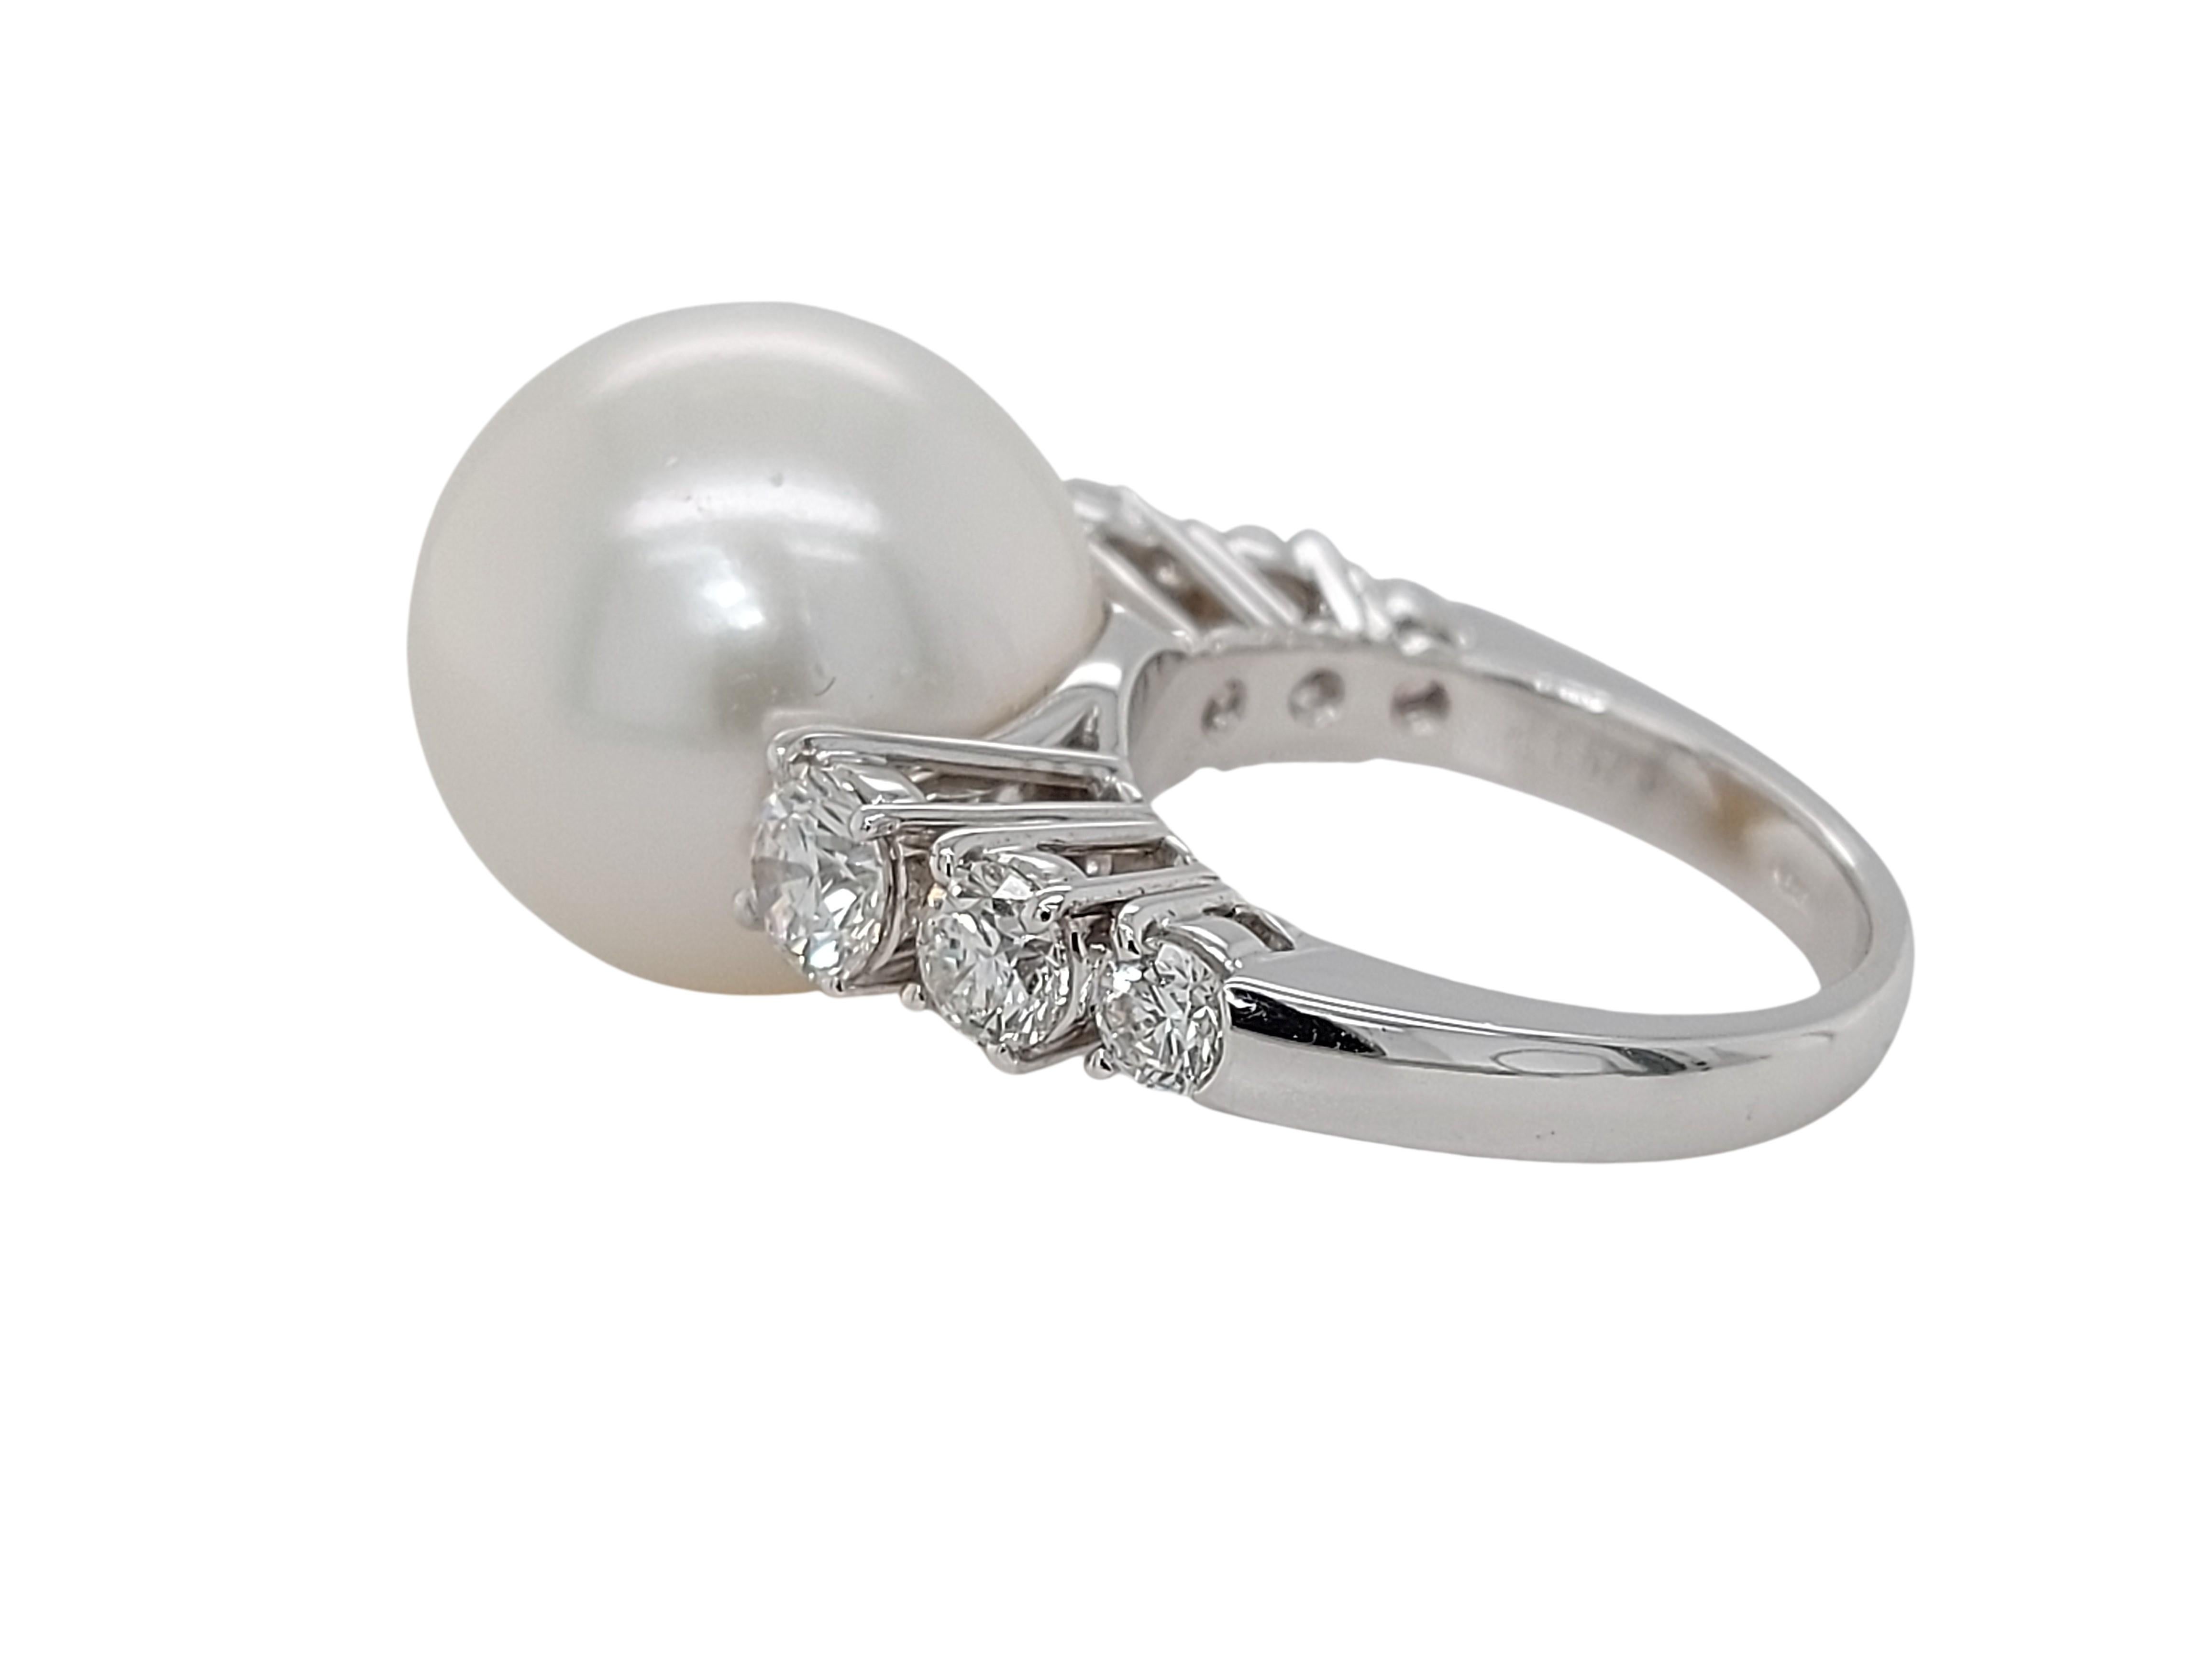 Artisan 18kt White Gold Ring with 1.64 Carat Diamonds and a Big Pearl South Sea For Sale